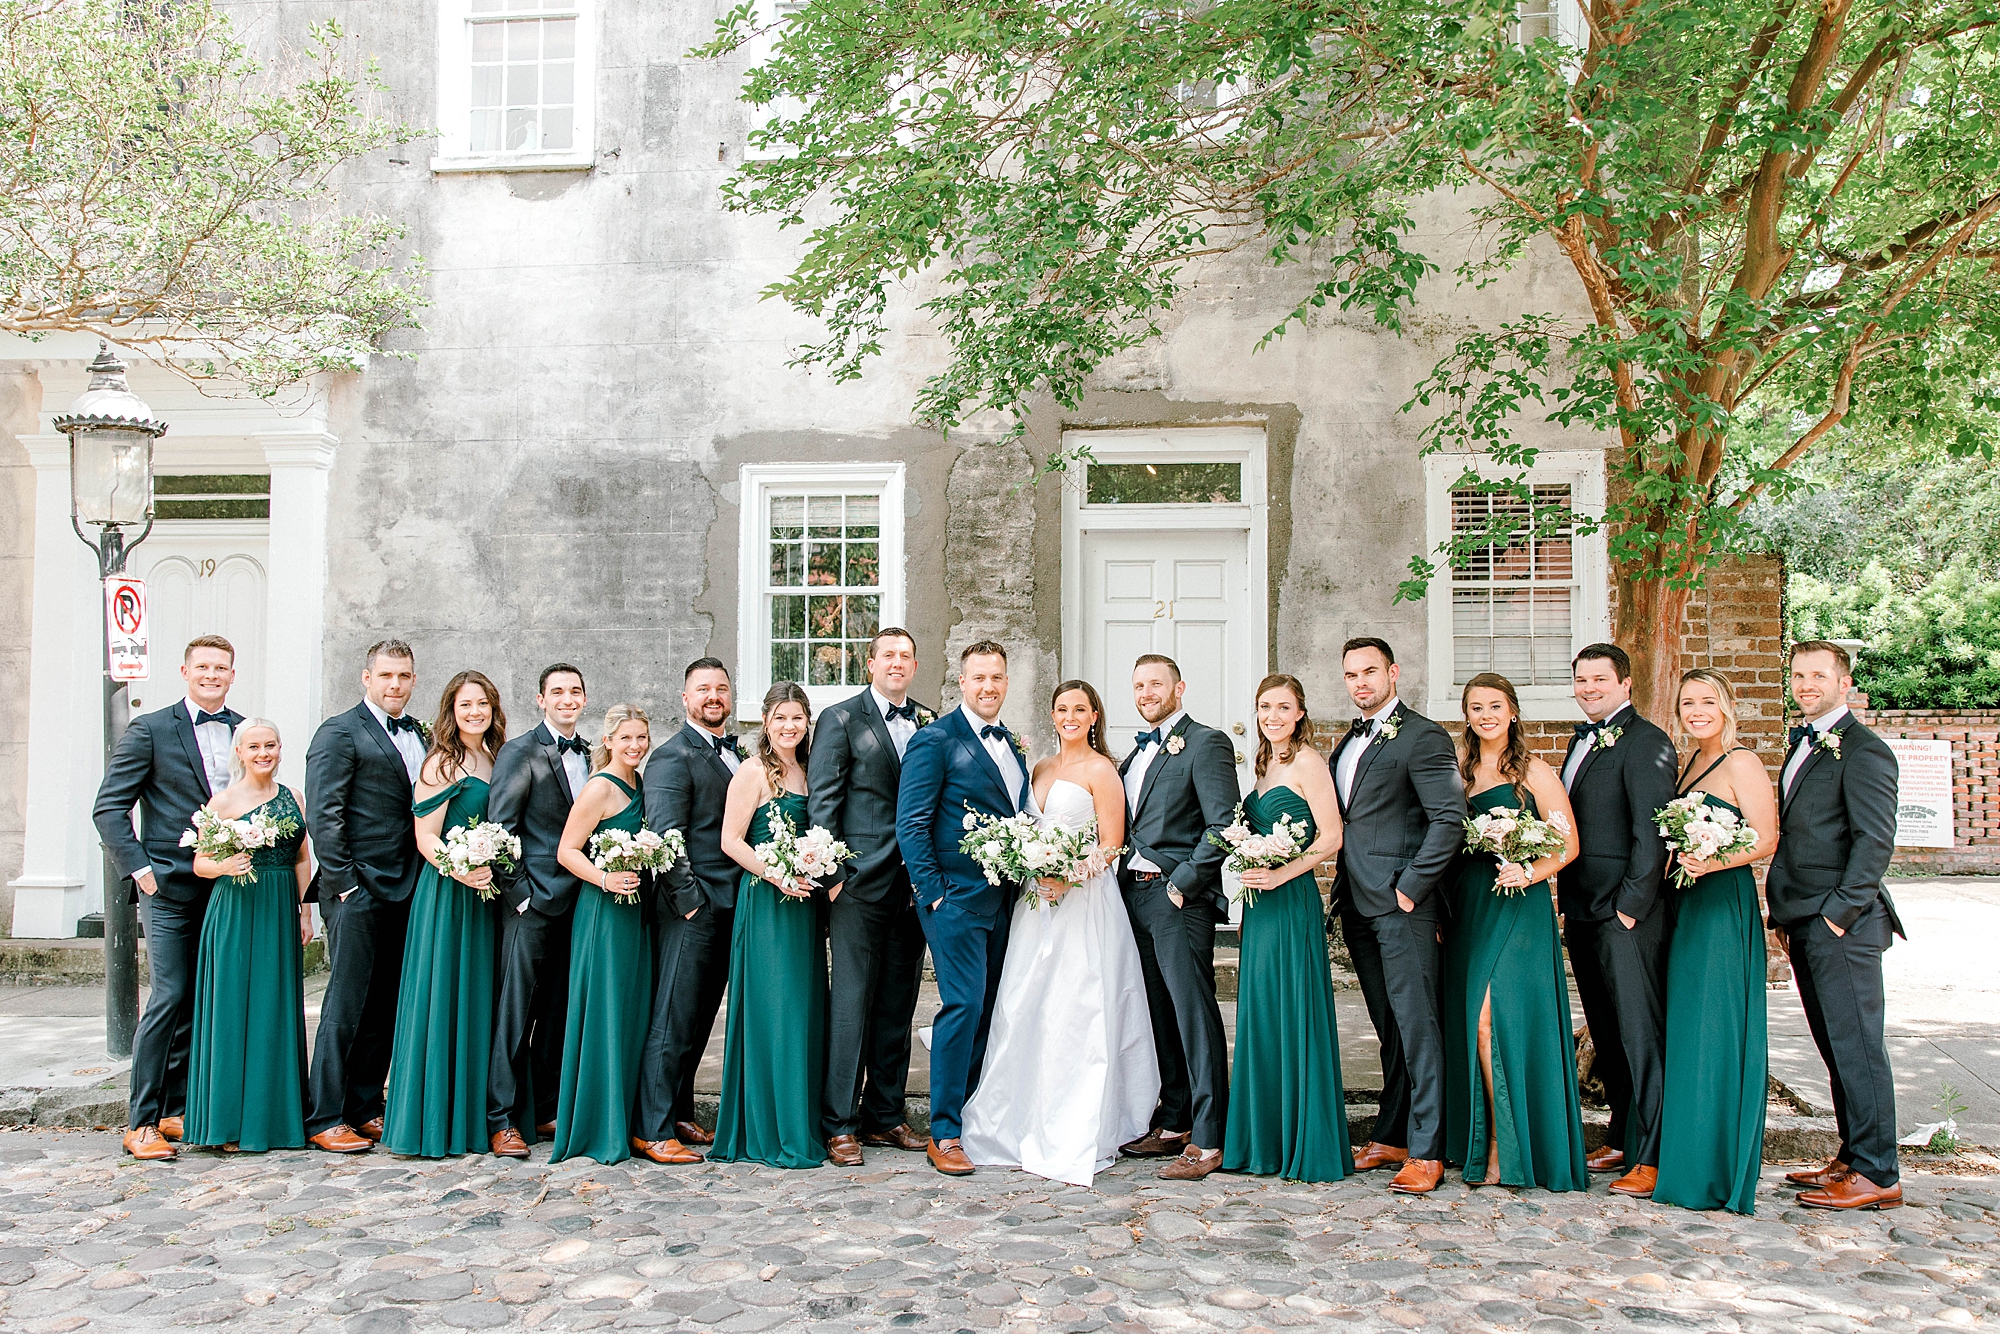 newlyweds pose with wedding party in green dresses and navy suits near The Cedar Room